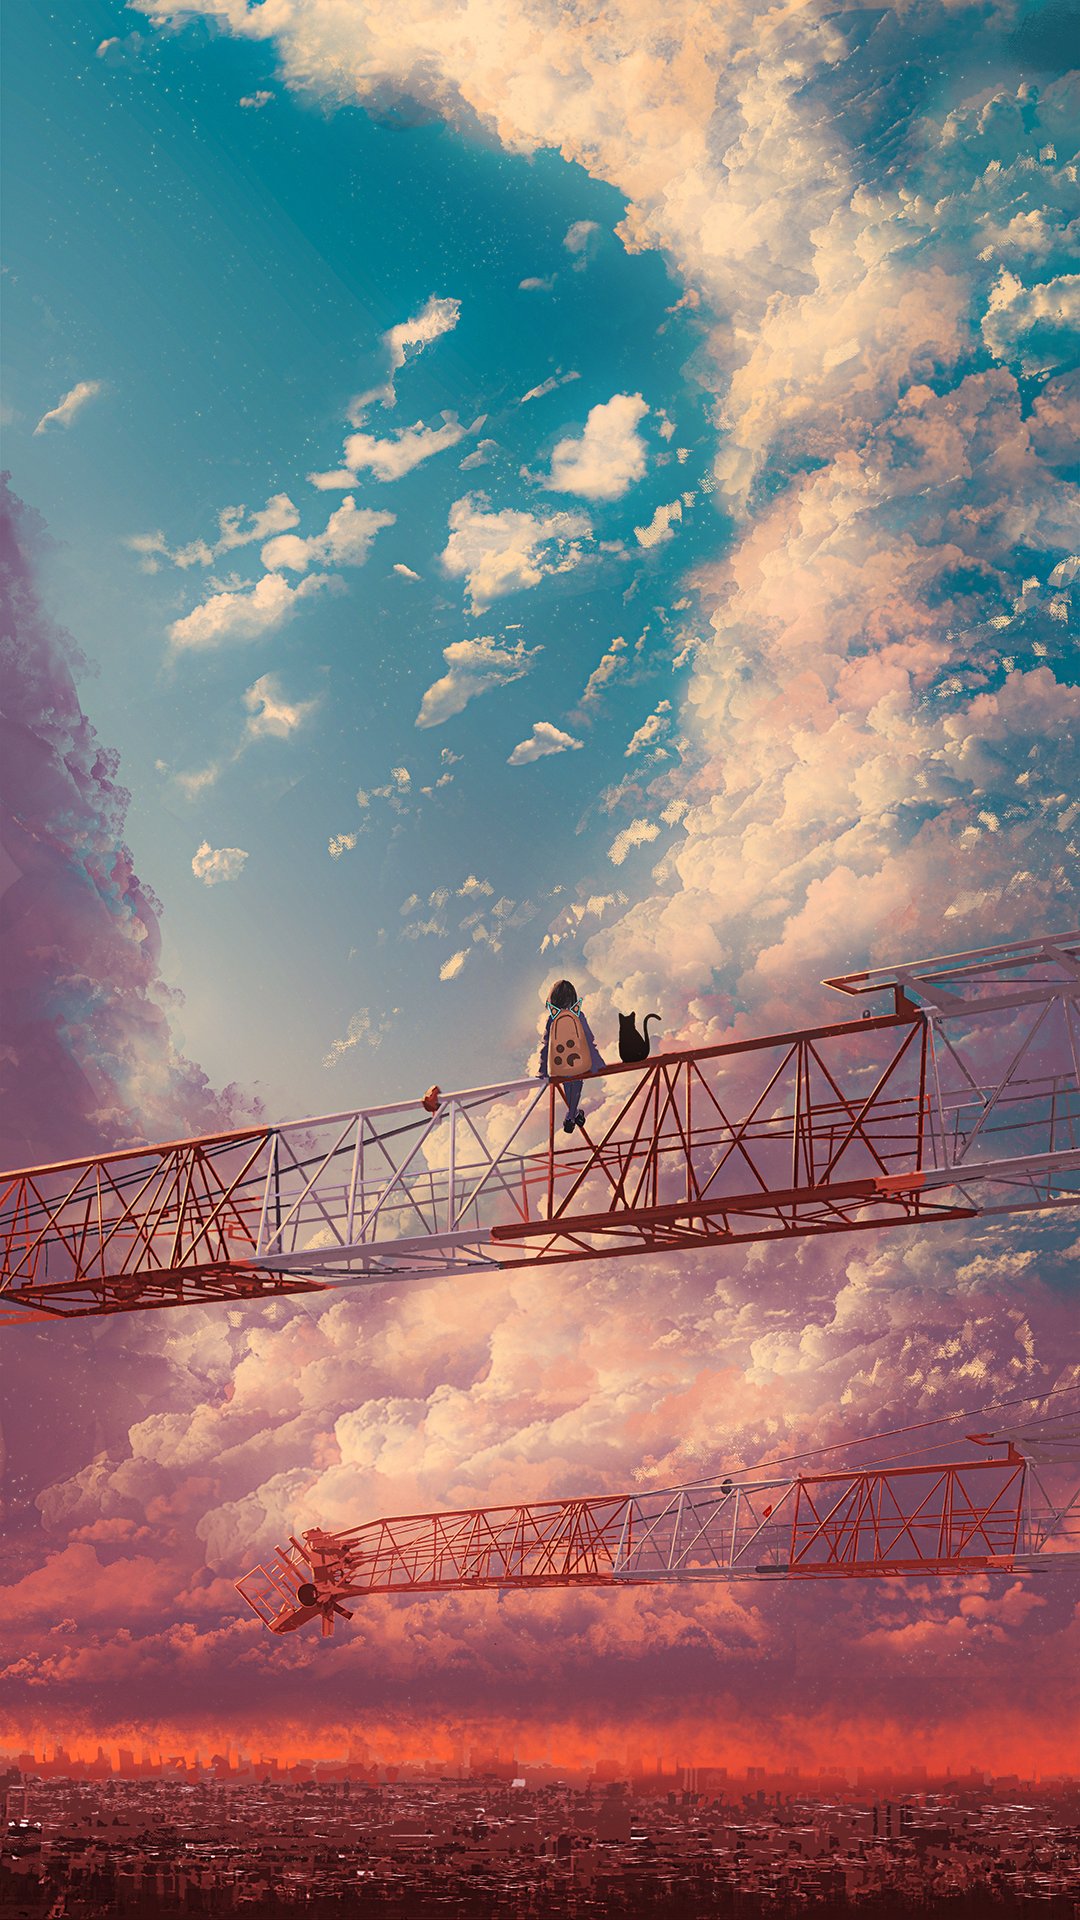 Anime 1080x1920 Chocoshi women outdoors anime girls portrait display rear view backpacks clouds horizon sky cityscape sunset sitting bag city animals cumulus truss wide angle sunset glow